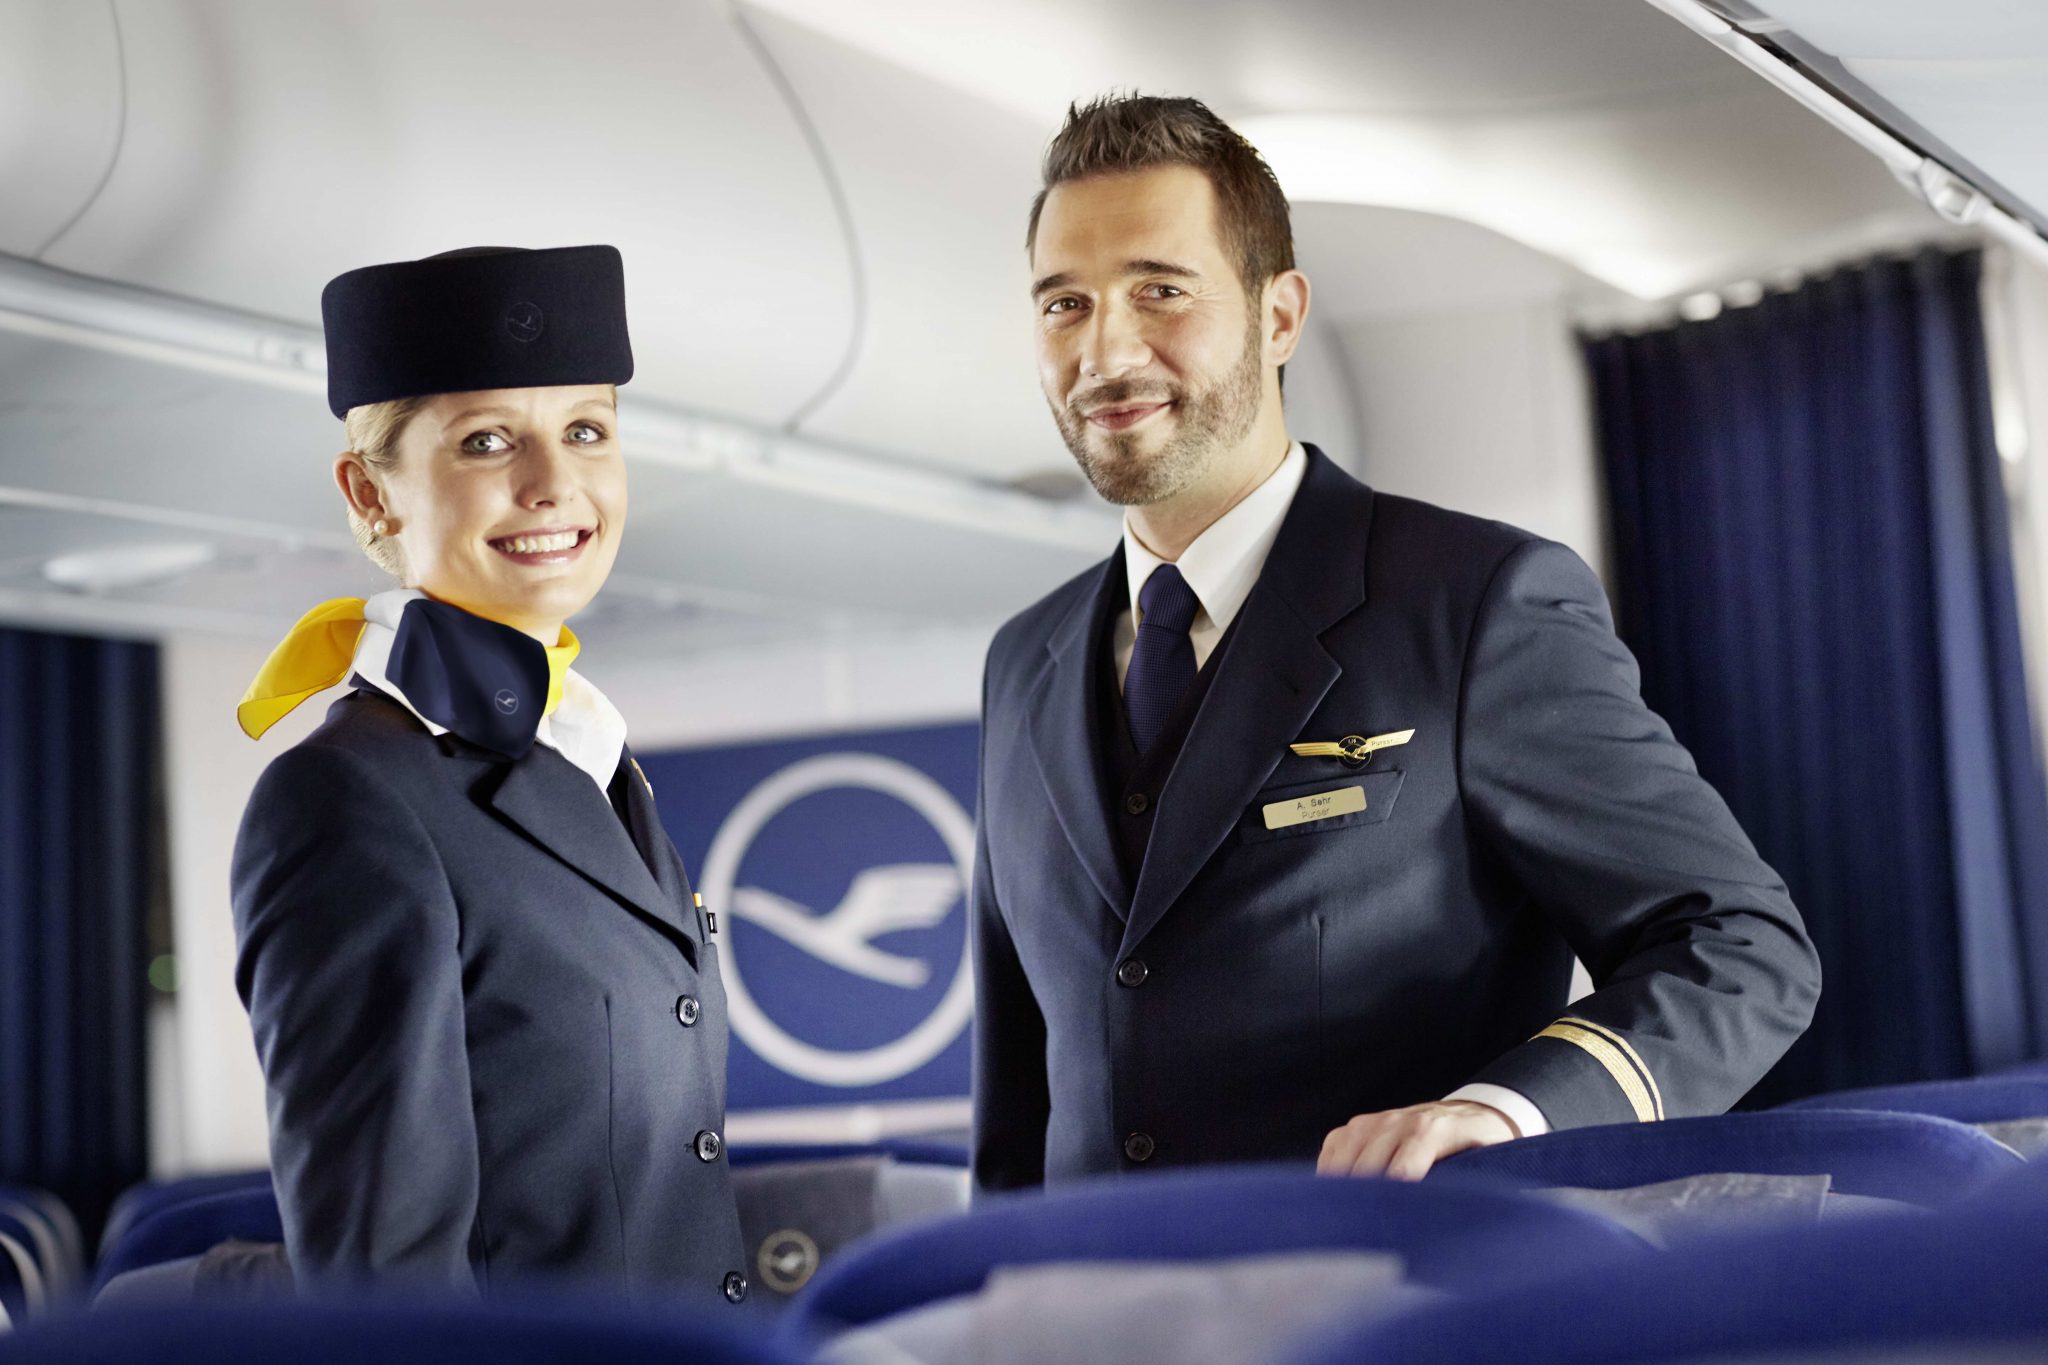 Easygoing Fume loyalty Will You Be Attending Lufthansa's Latest Cabin Crew Open Day in Munich on  1st September?